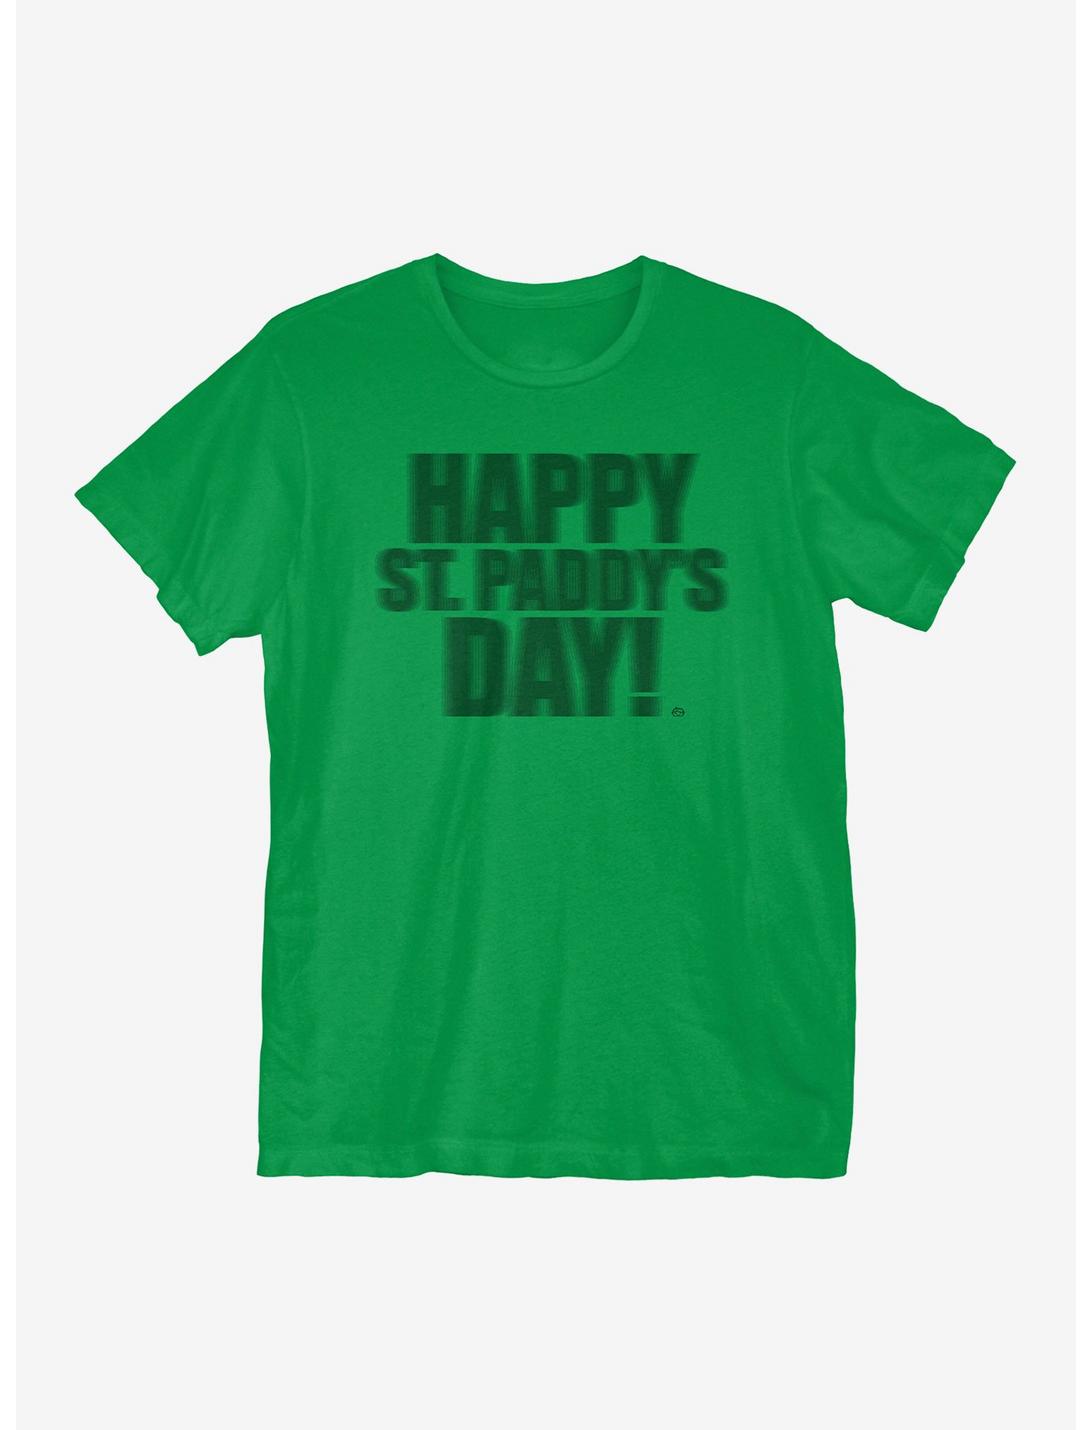 St Patrick's Day Blurred Lines T-Shirt, KELLY GREEN, hi-res